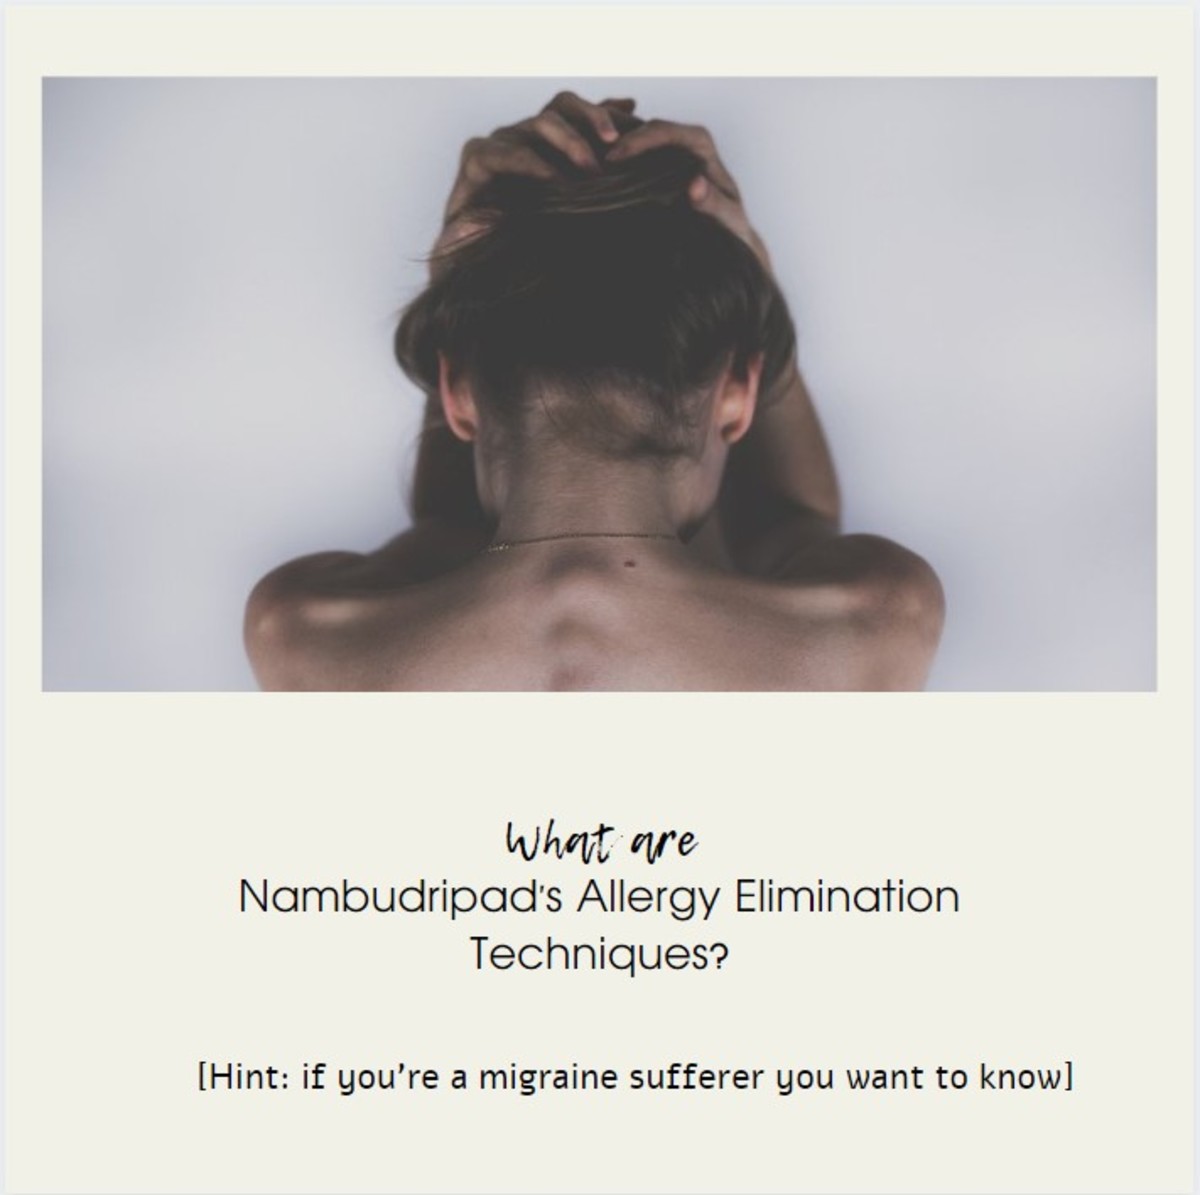 How I Got Rid of My Debilitating Migraines Forever With NAET